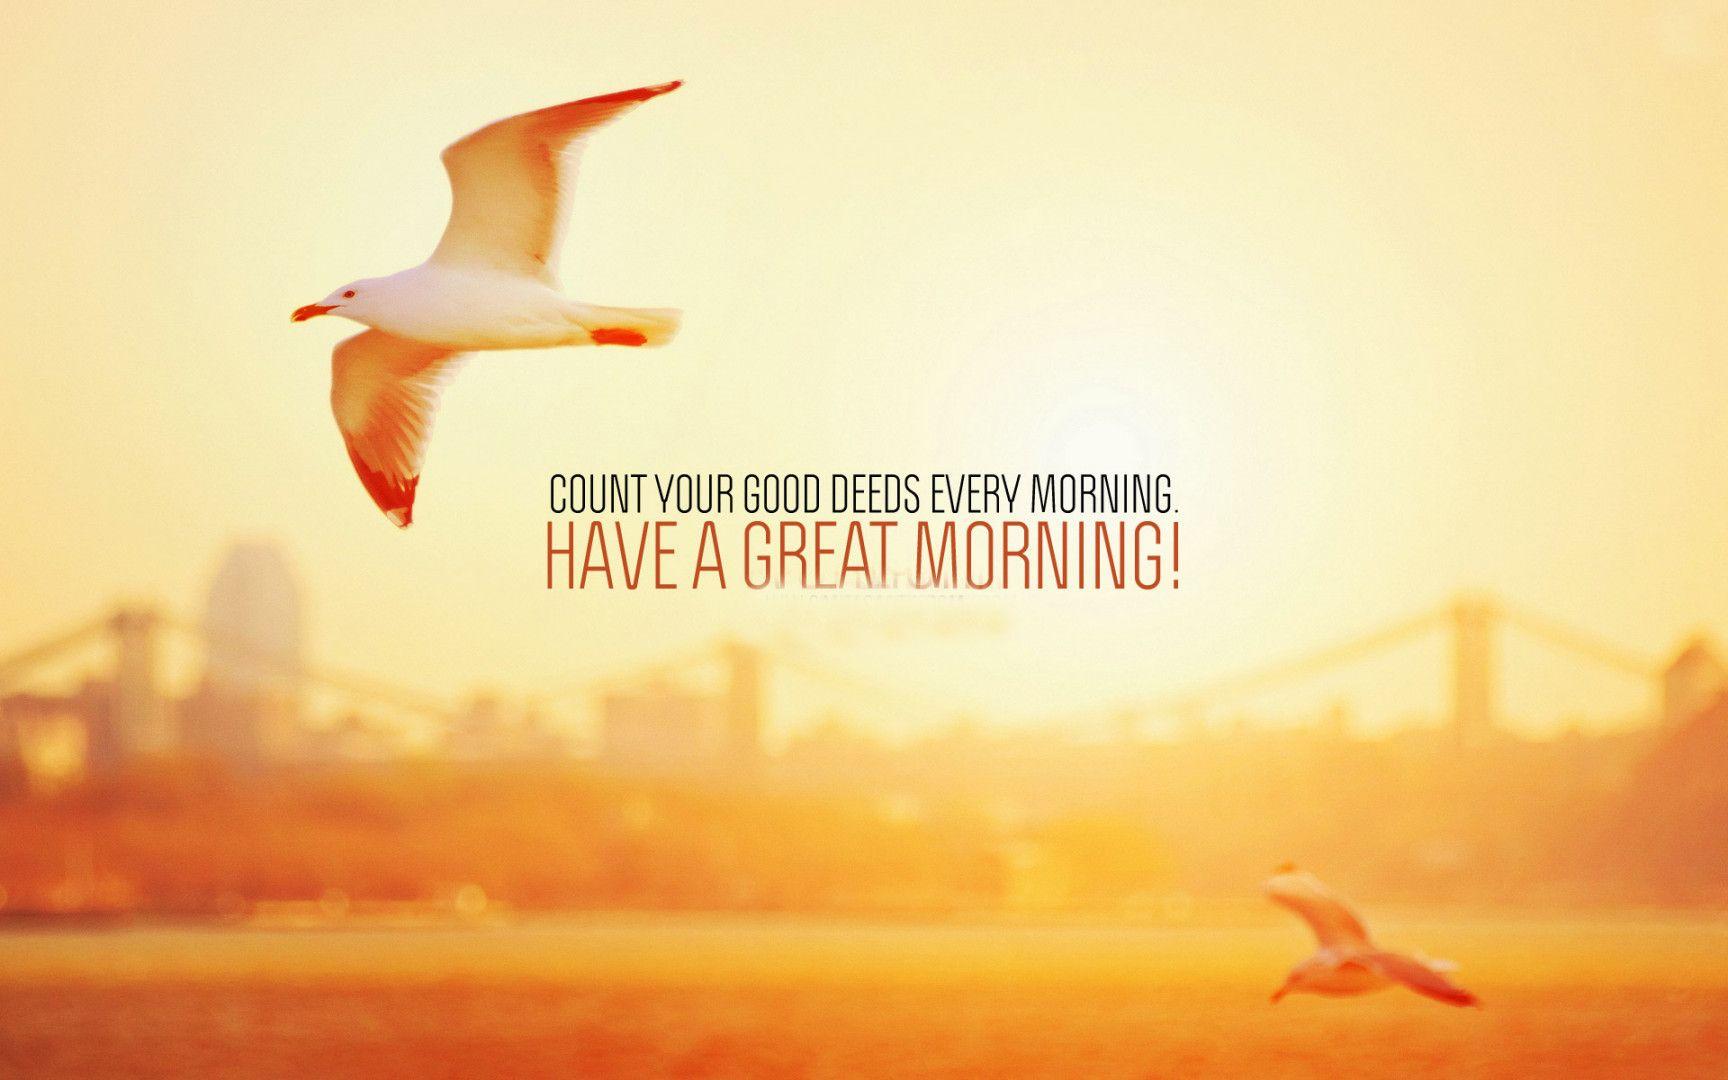 Download Good Morning Have A Nice Day Image. allimagesgreetings